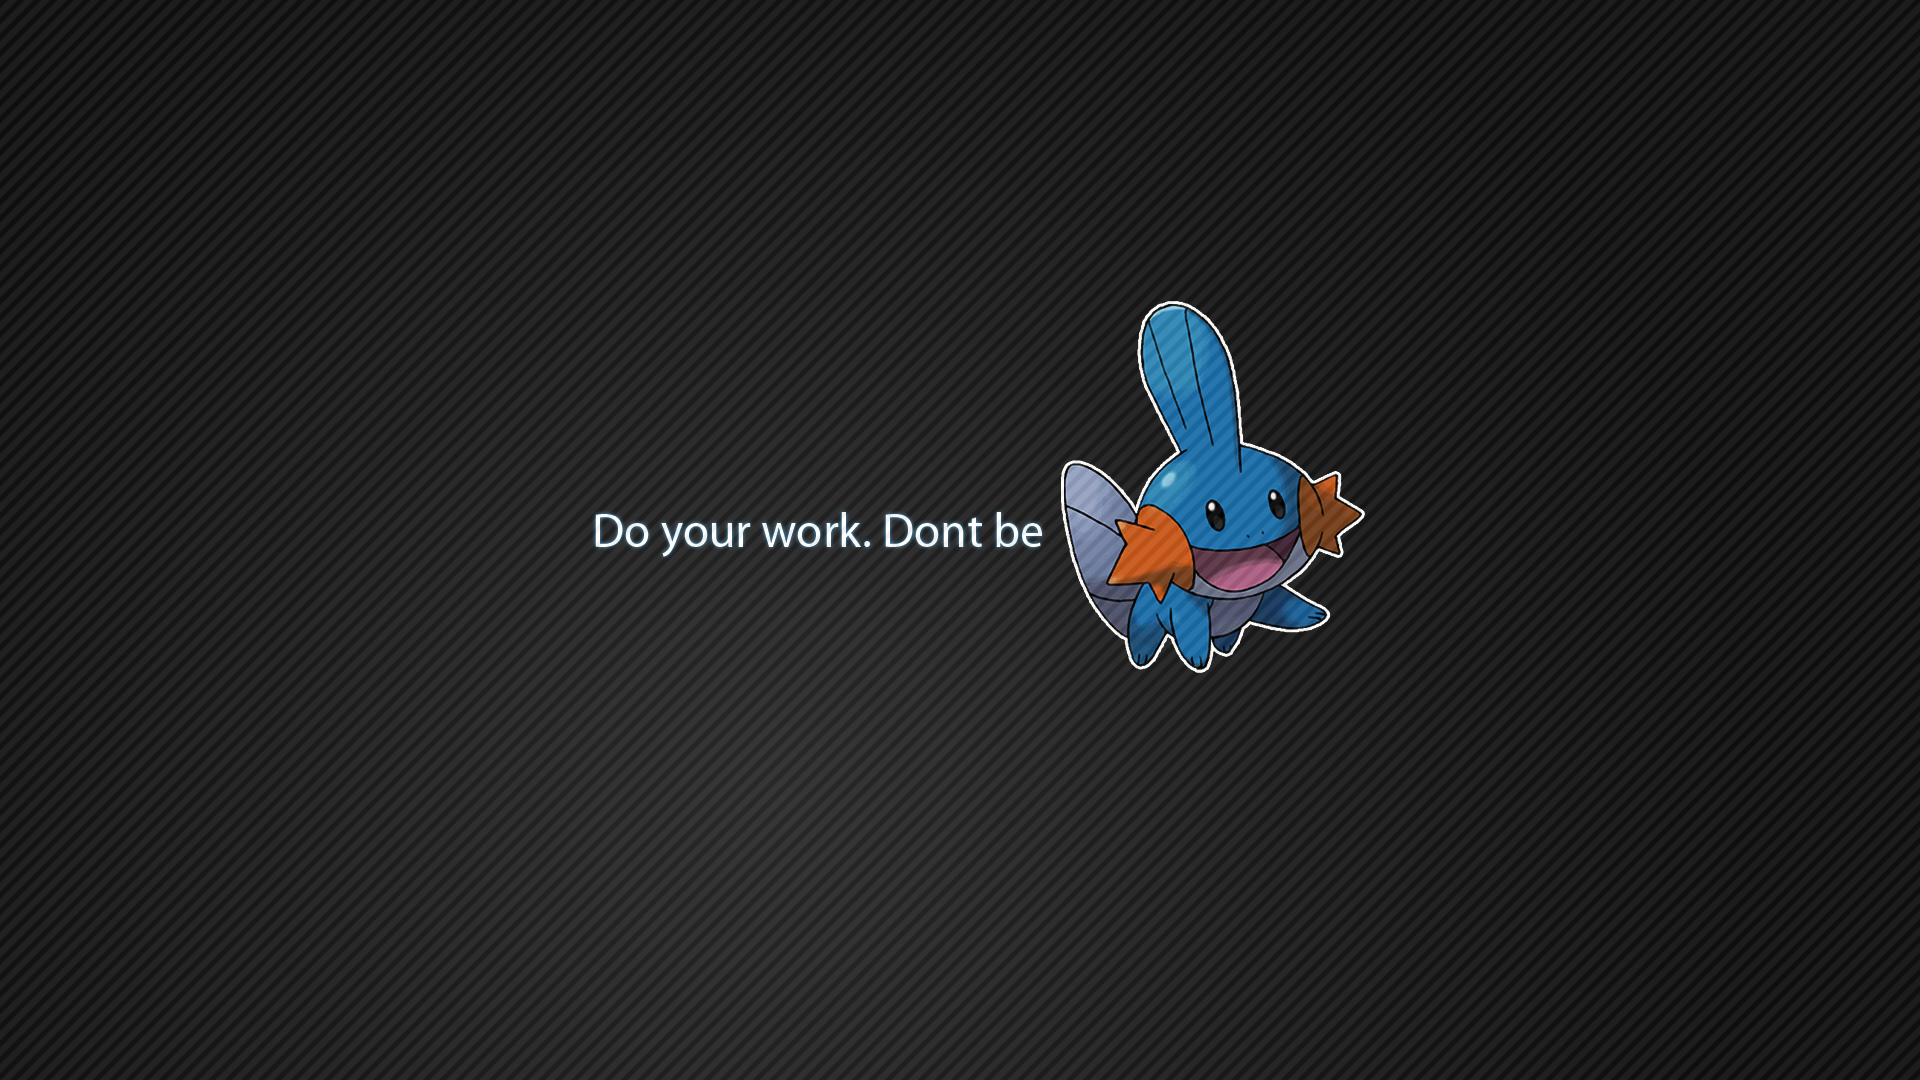 mudkip : Desktop and mobile wallpapers : Wallippo